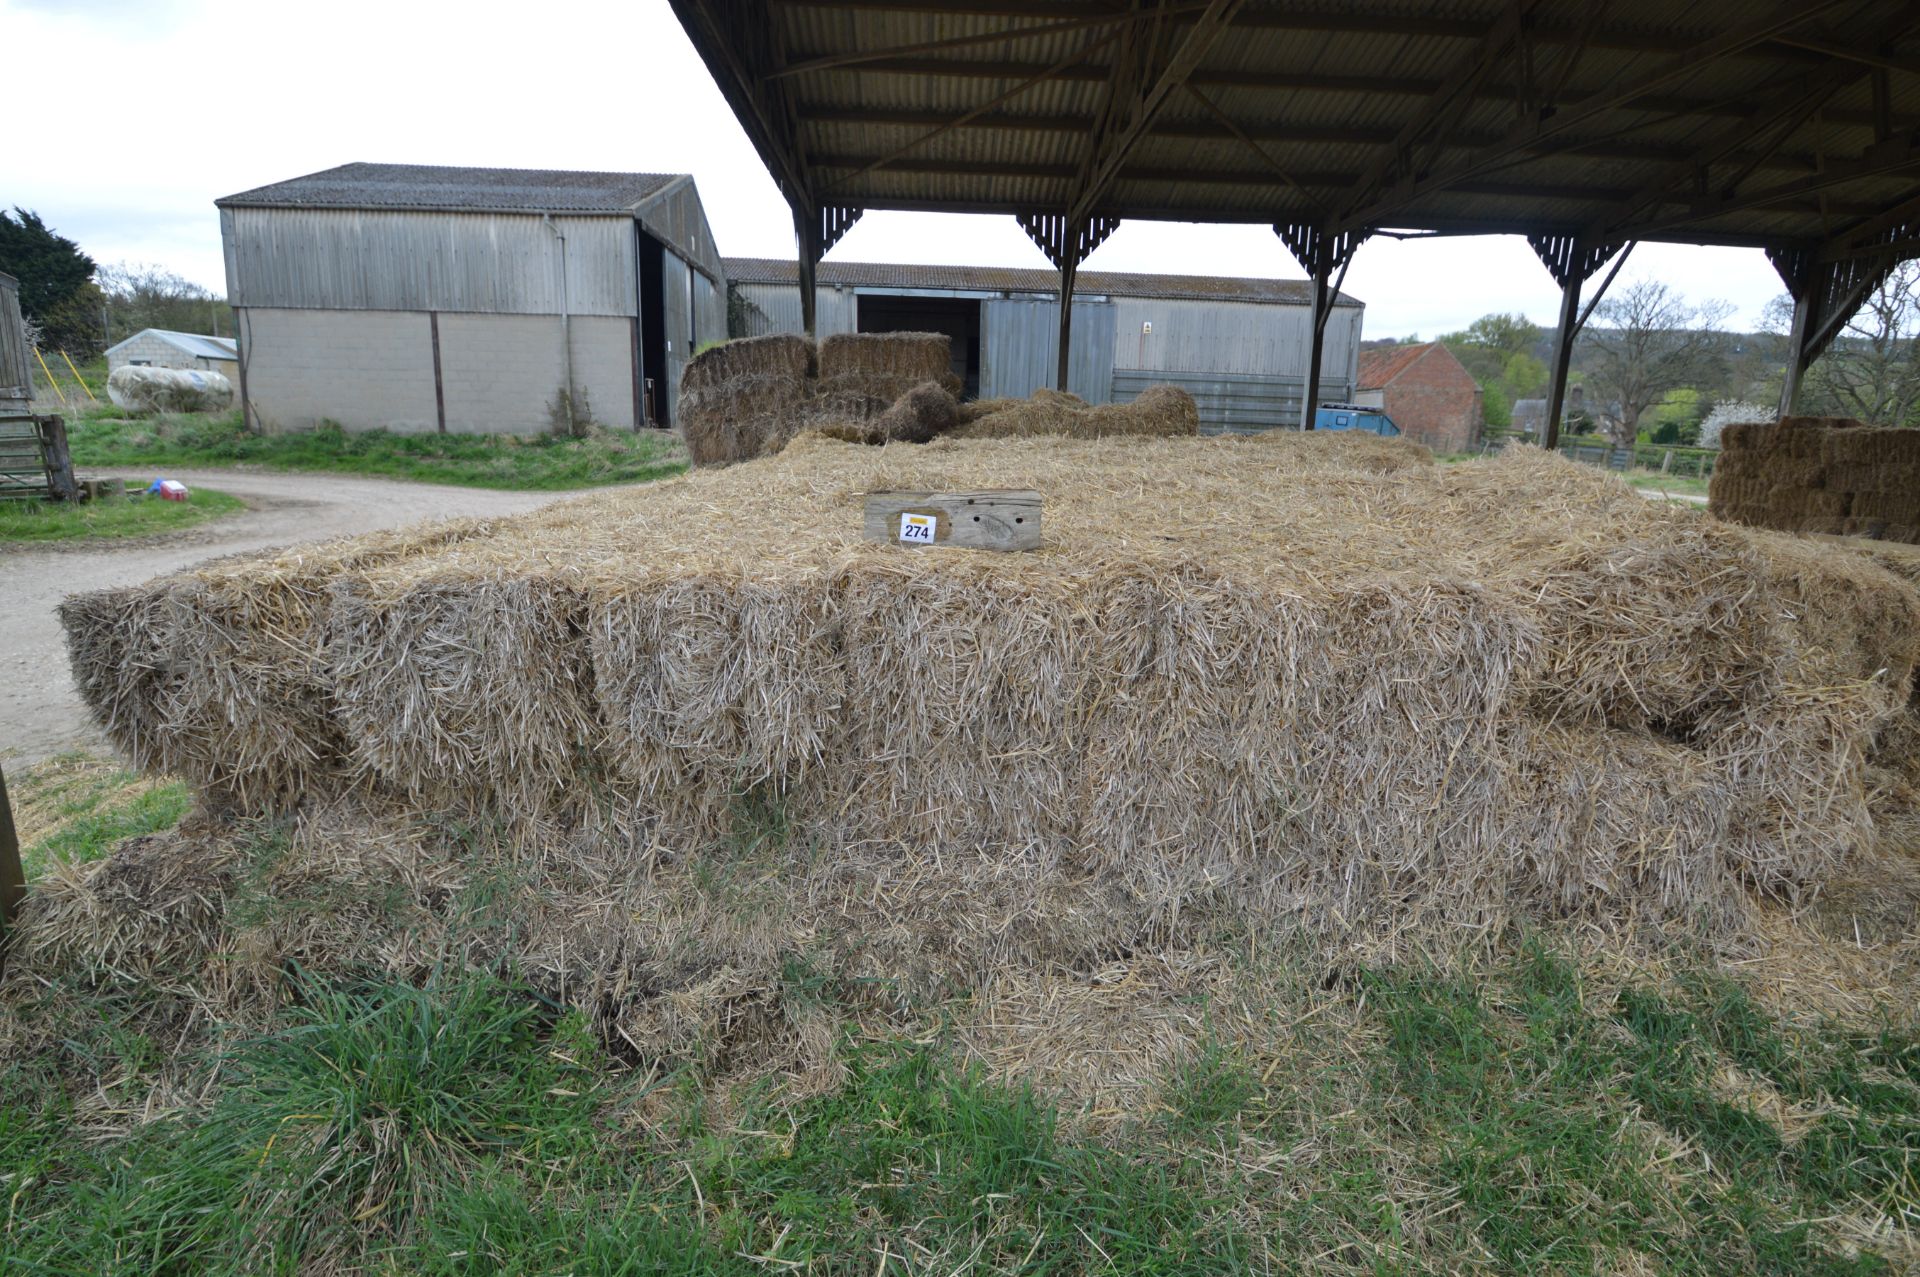 APPROX 60 BALES OF STRAW